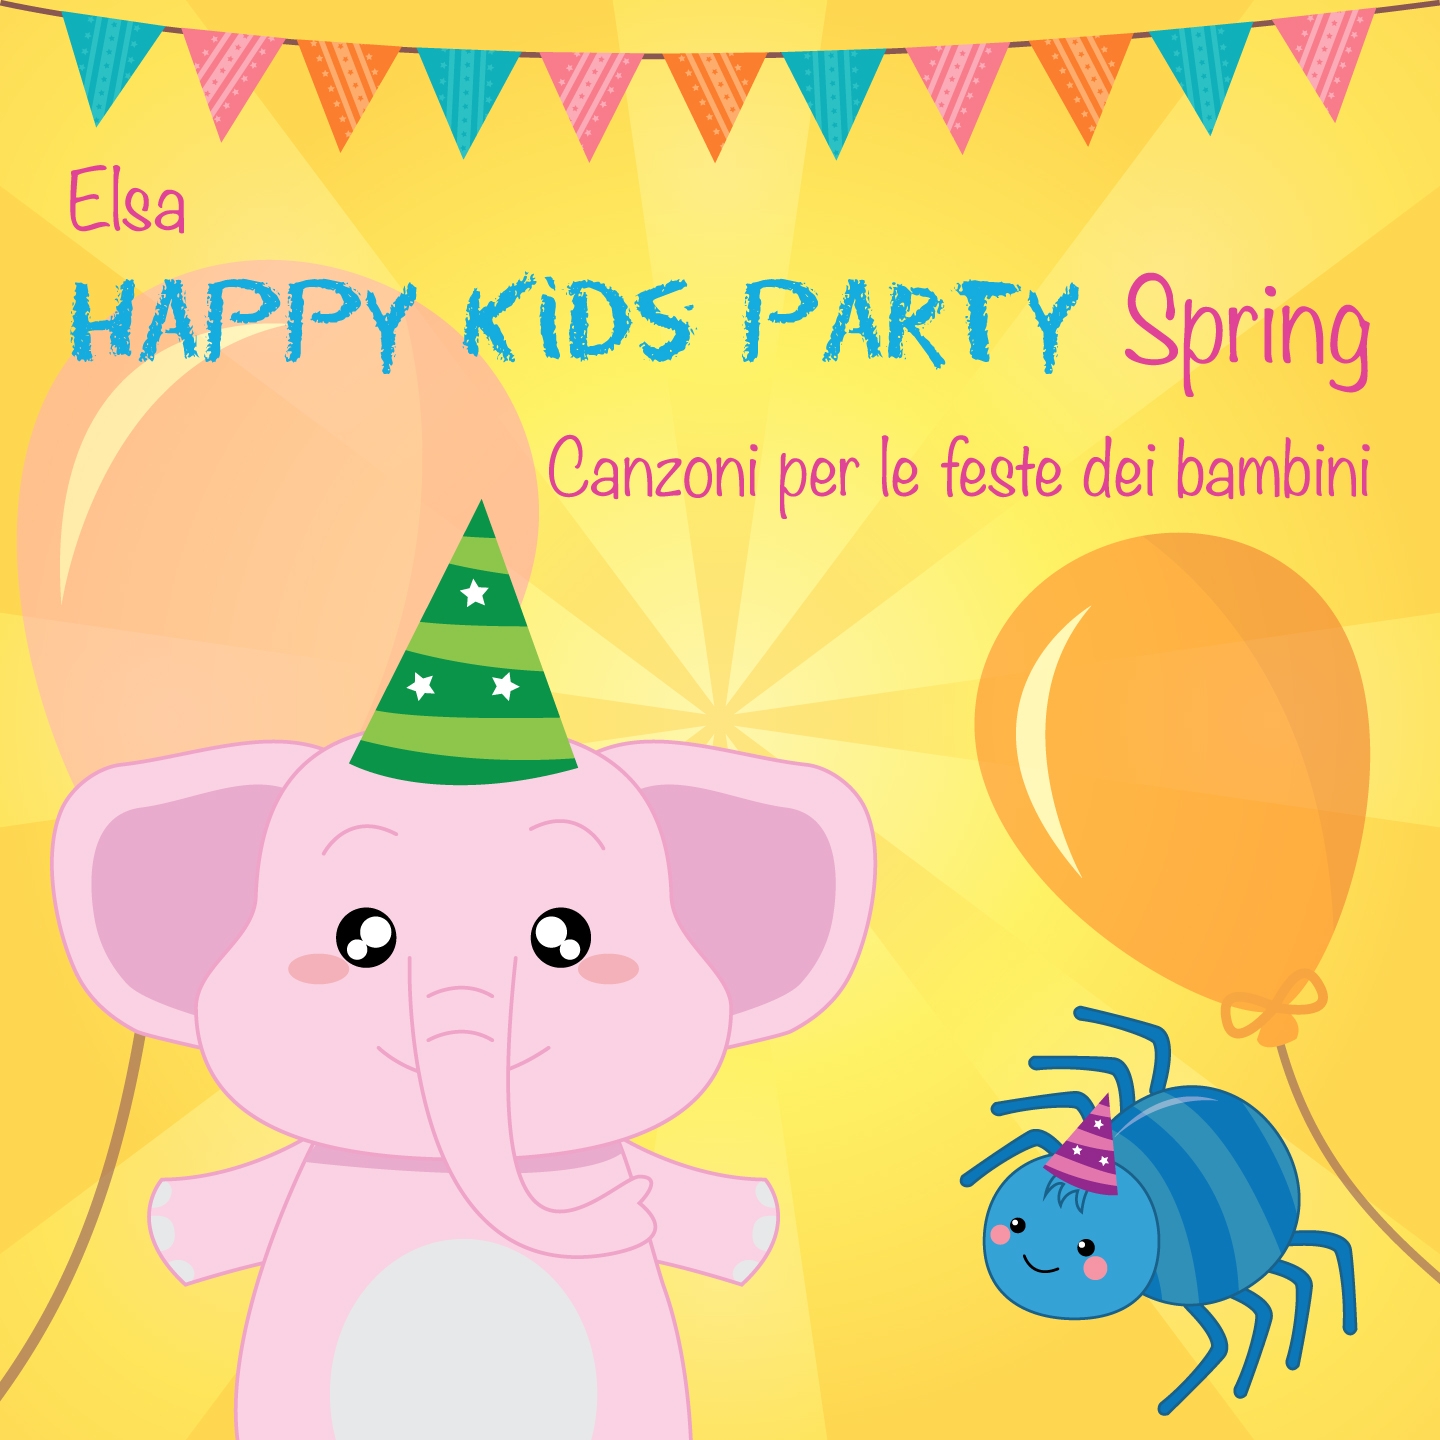 Happy Kids Party Spring